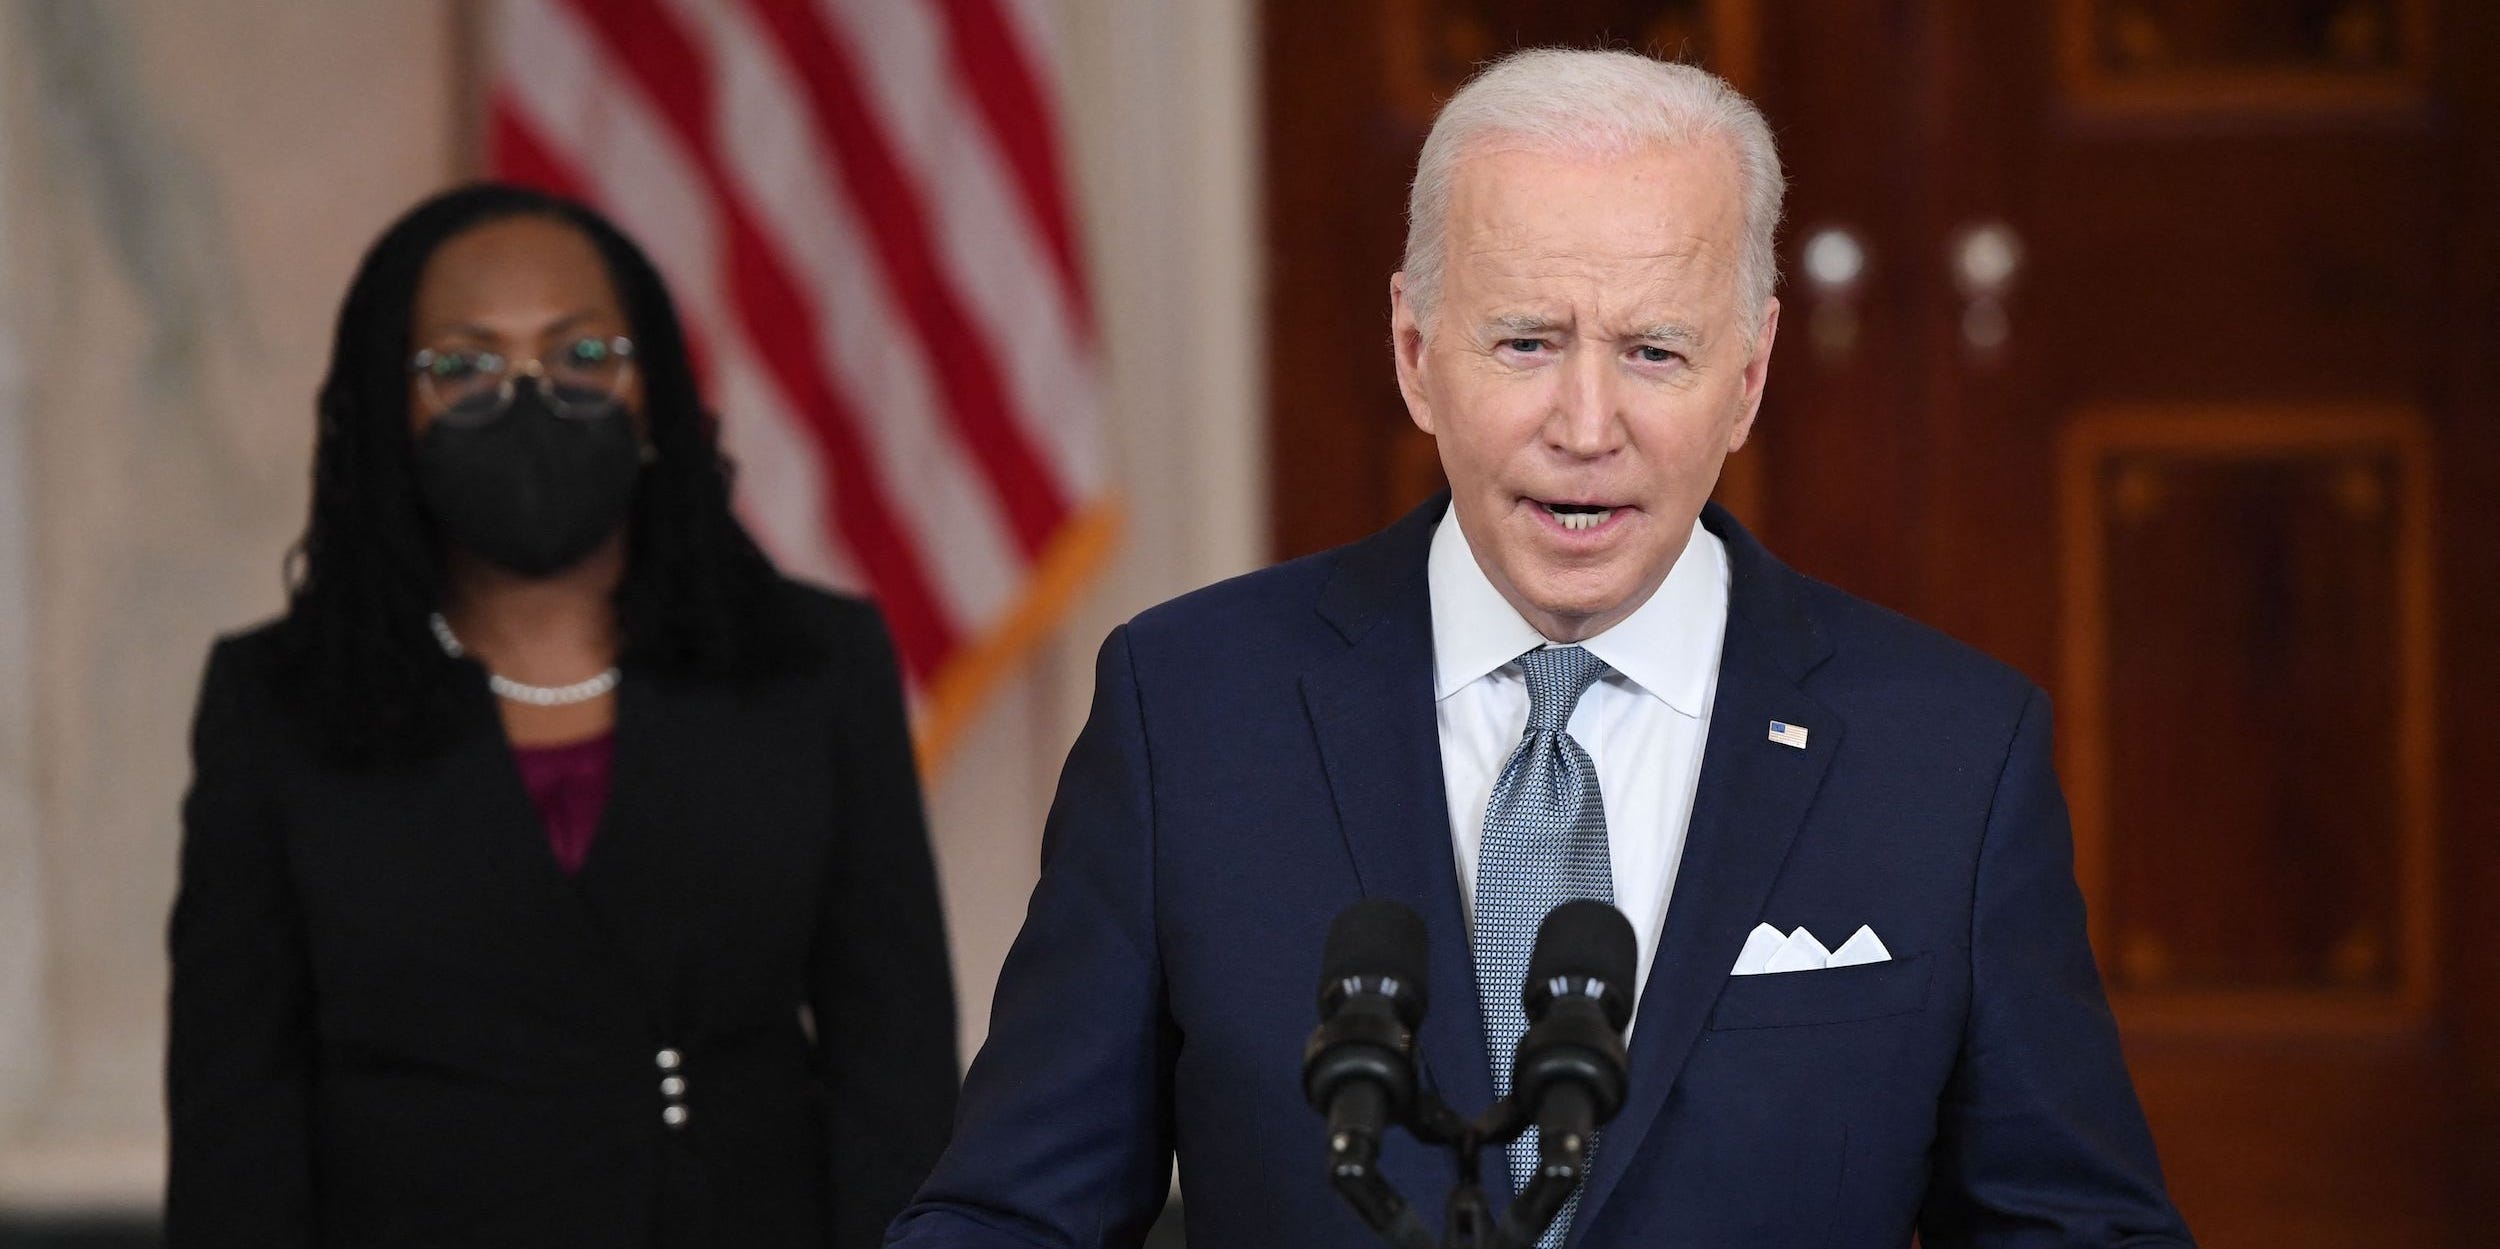 US President Joe Biden announces Judge Ketanji Brown Jackson as his nominee for Associate Justice of the US Supreme Court in the Cross Hall of the White House in Washington, DC